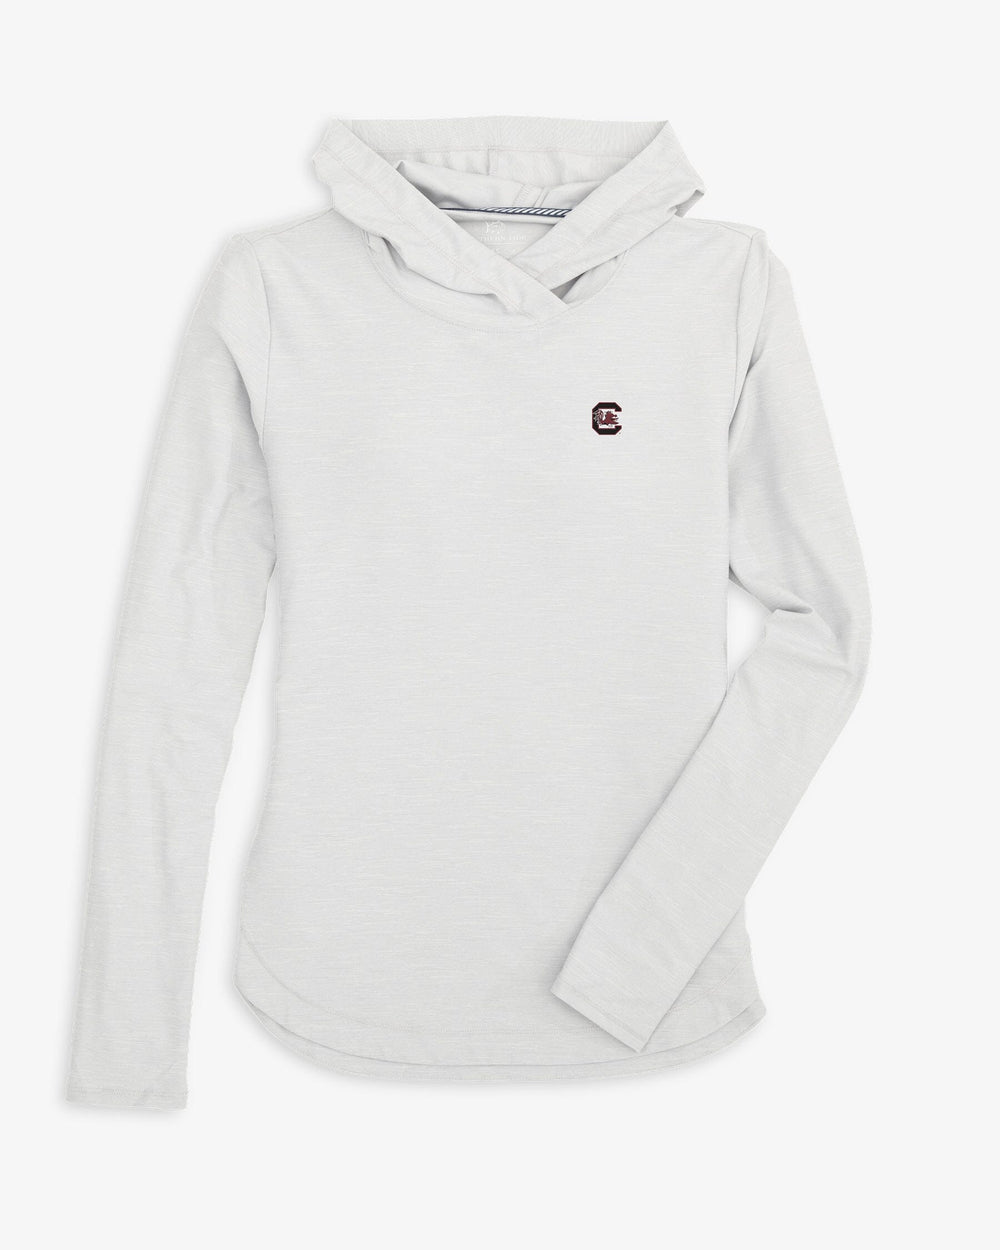 The front view of the South Carolina Gamecocks Linley brrr°®-illiant Performance Hoodie by Southern Tide - Platinum Grey 